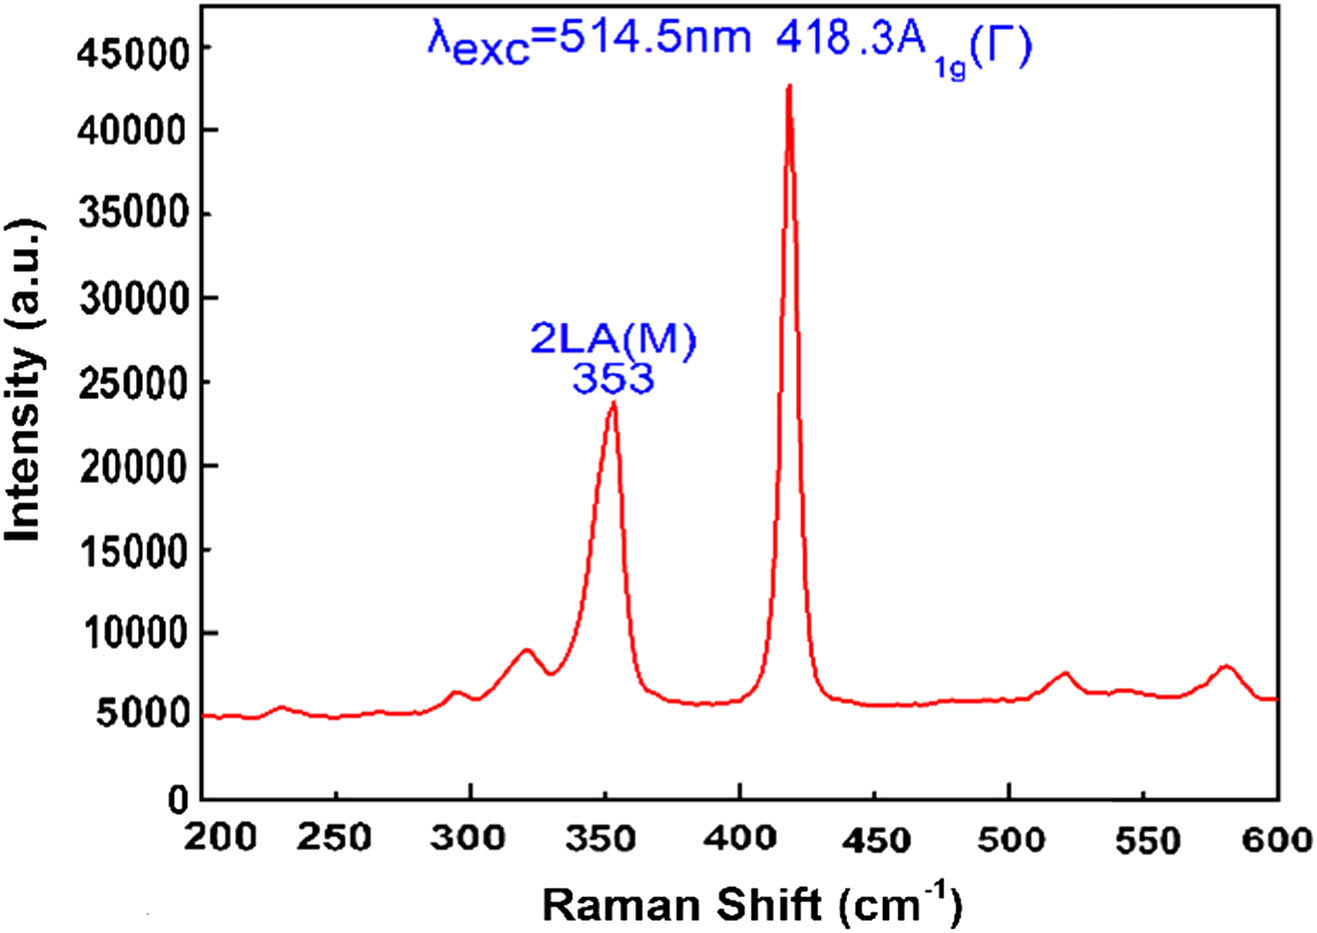 Raman spectrum of the WS2 layers on the SPR sensor structure.